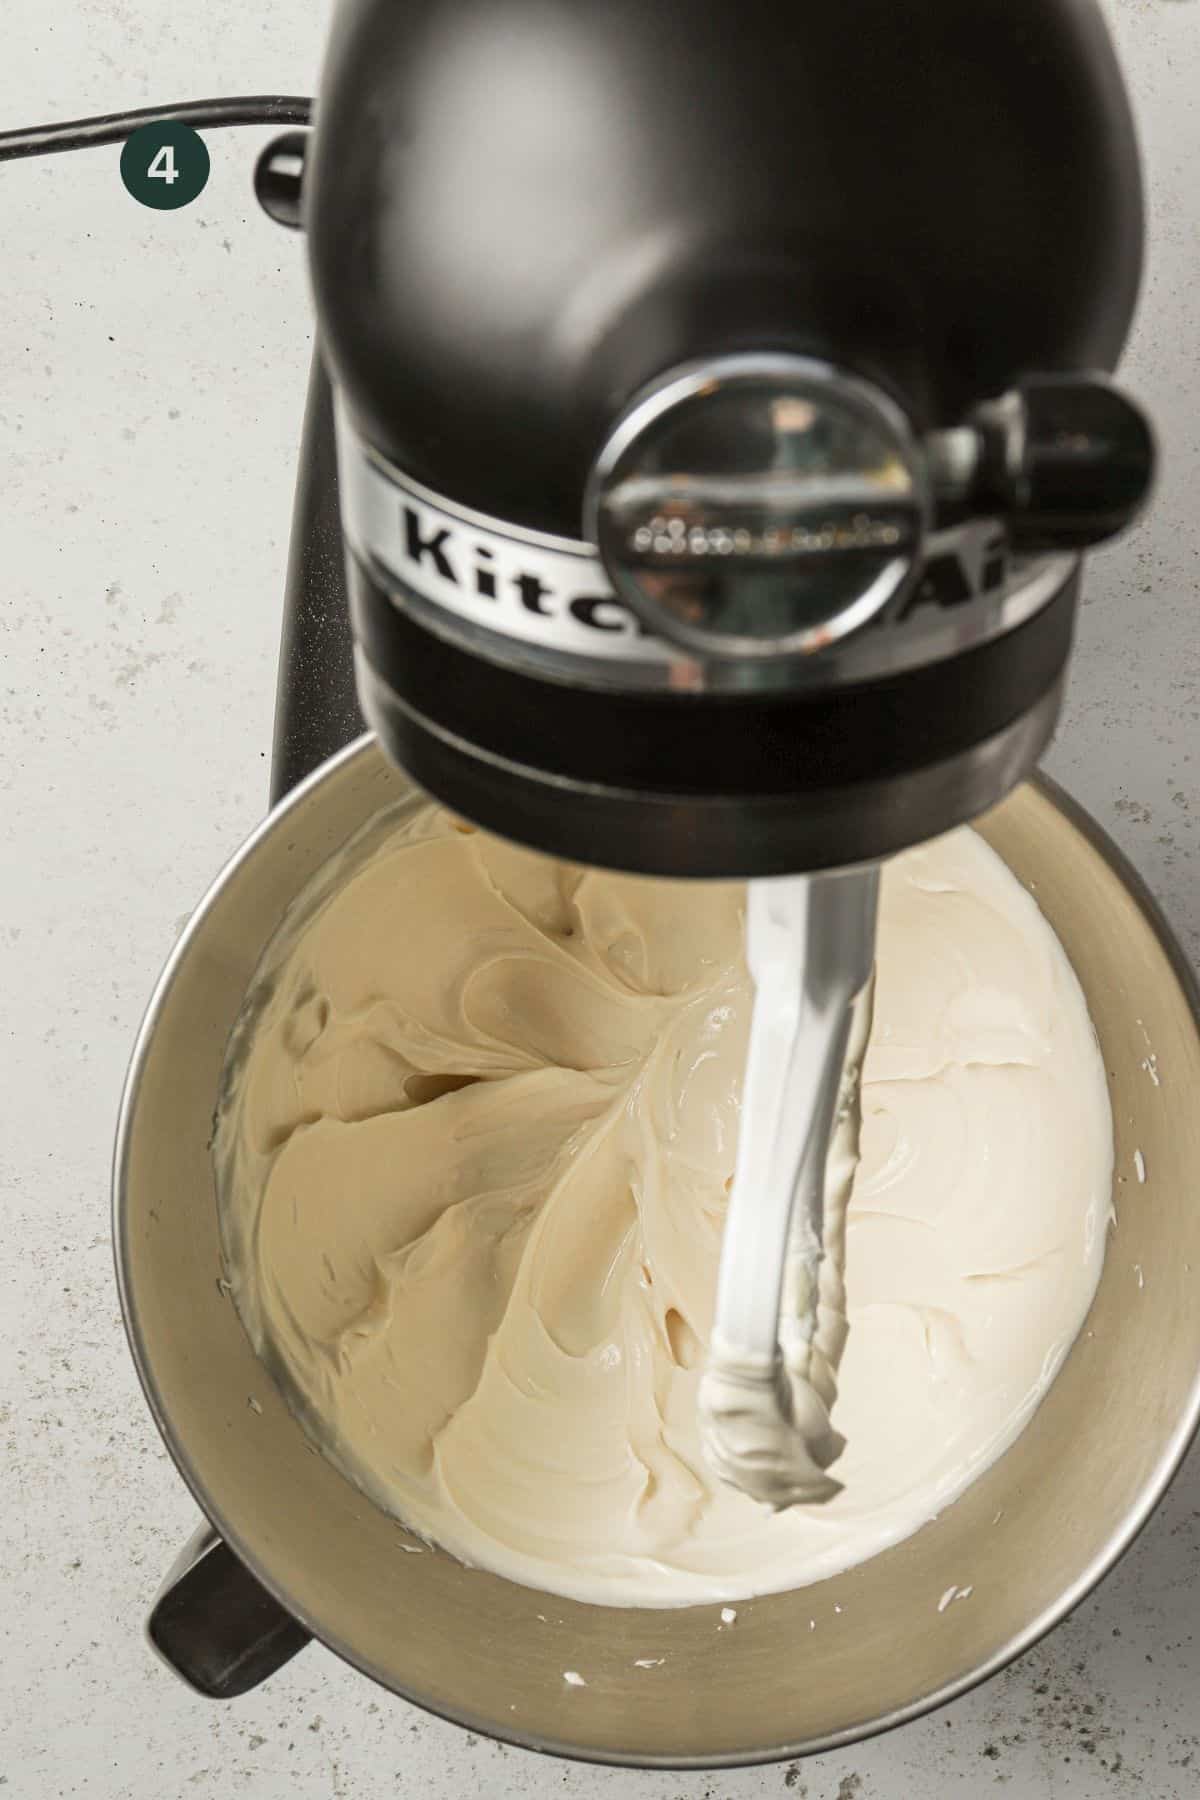 Cream cheese and sugar whipped in a mixer.